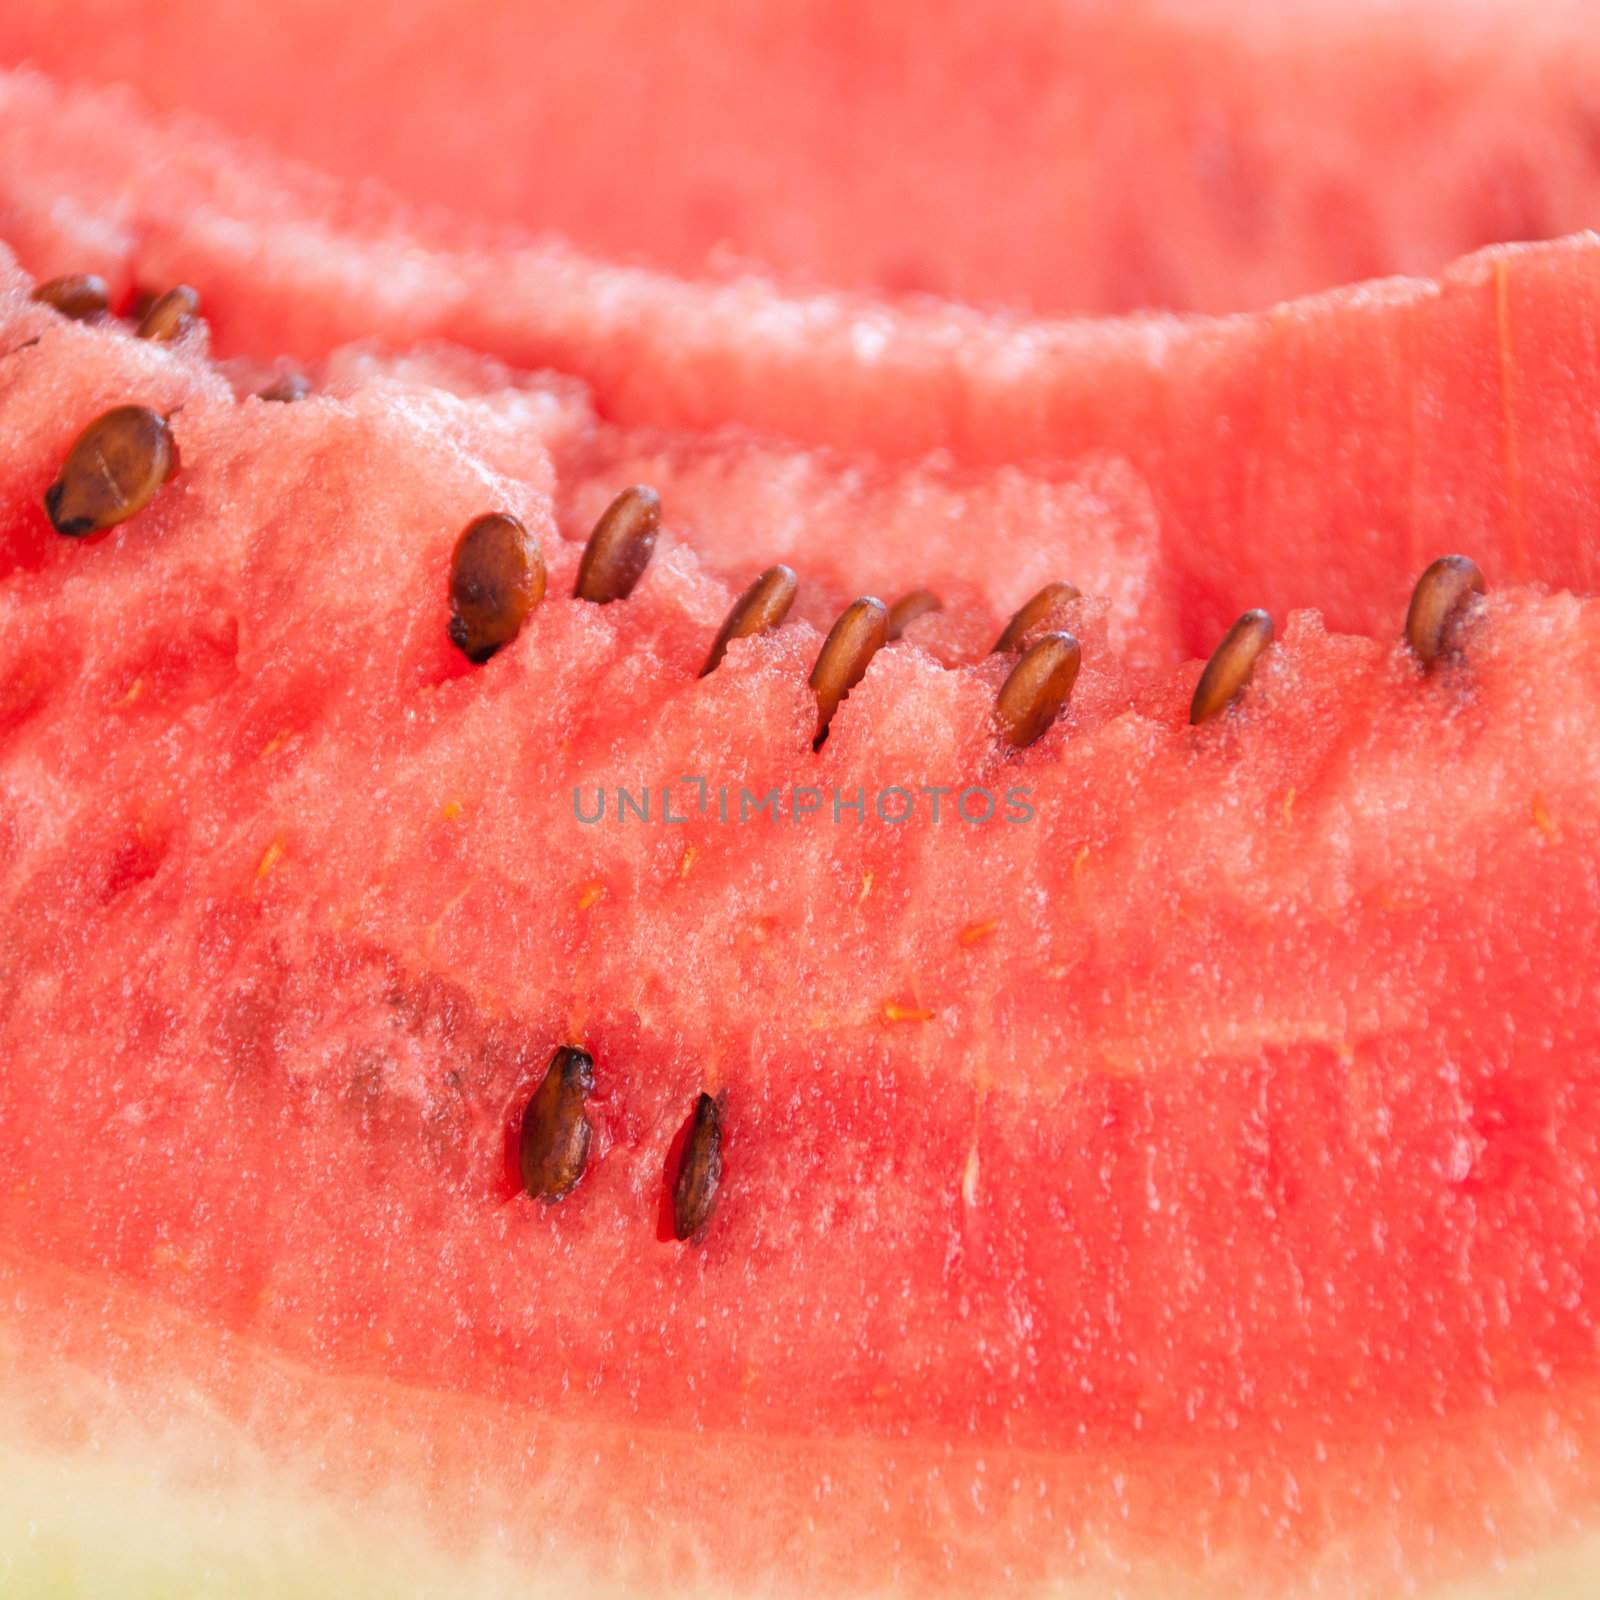 delicious watermelon slice close-up (refreshing summer fruit)